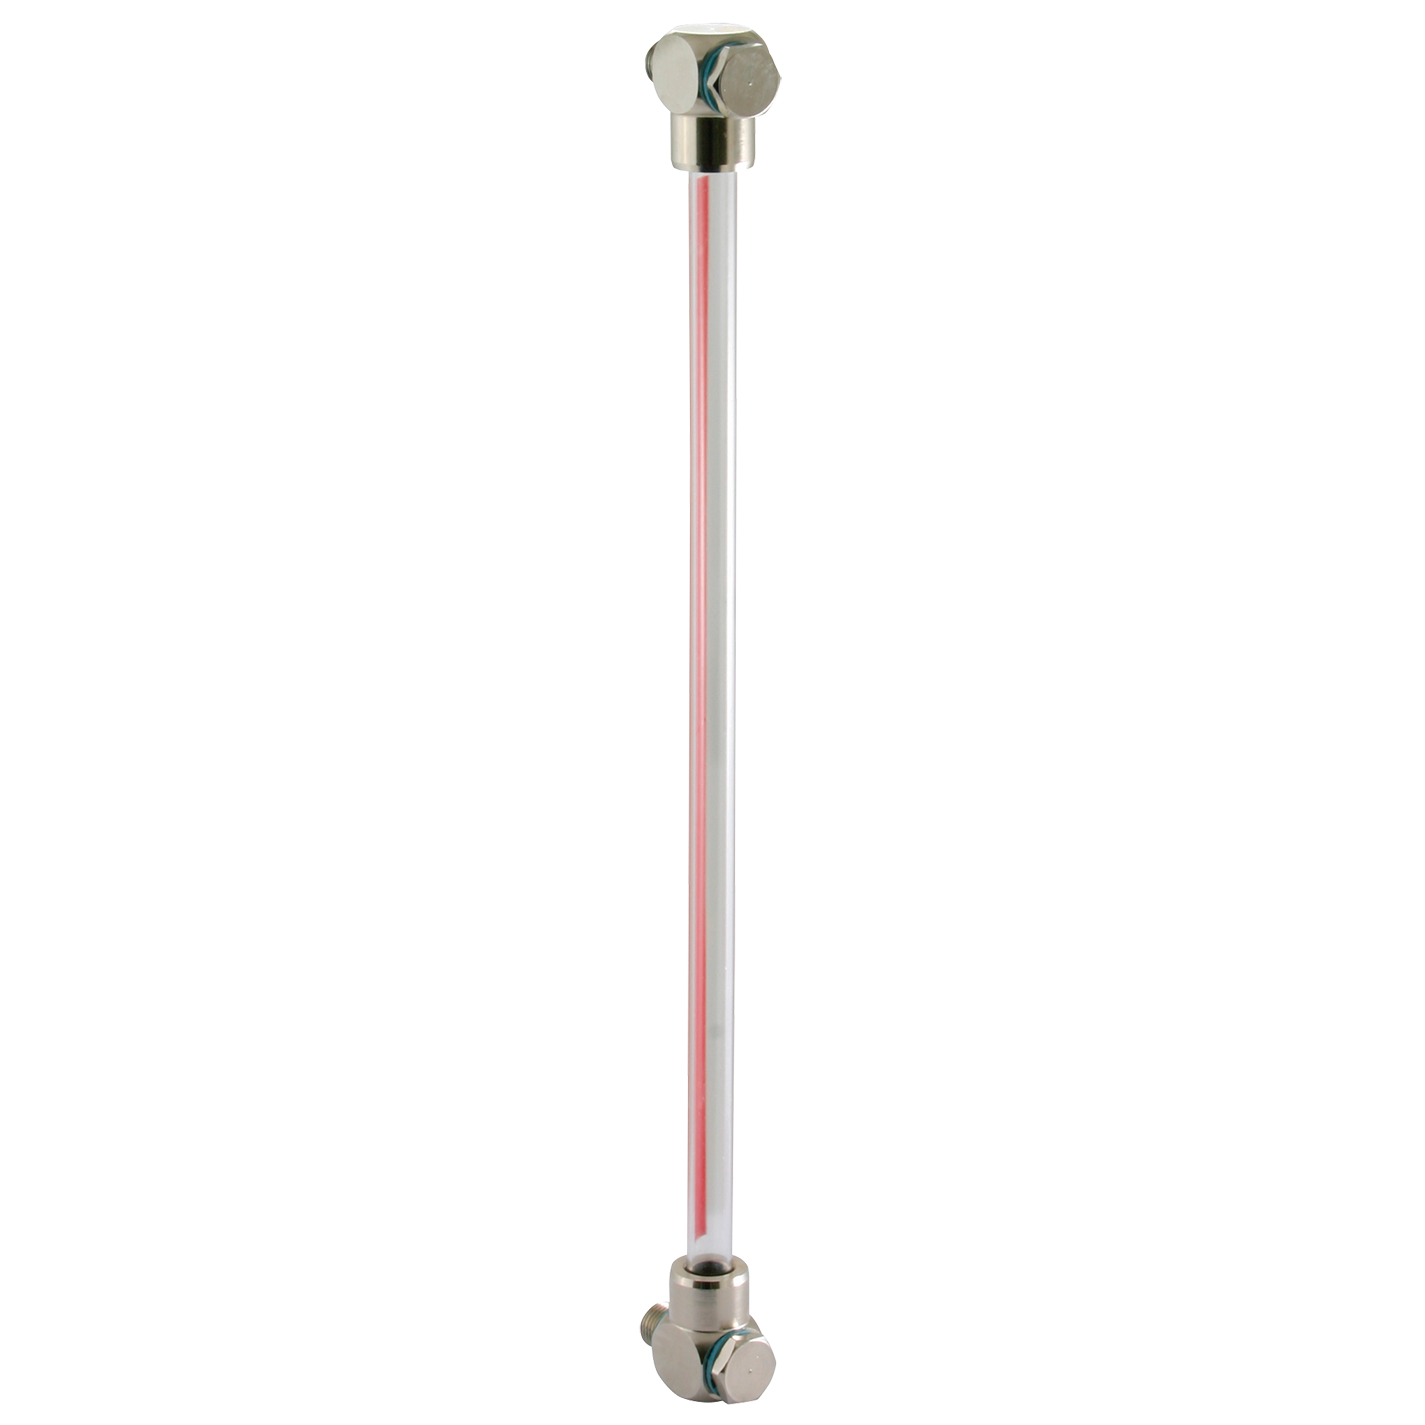 1/4" BSP Fluid Level Gauge W/O Thermometer Centres 1000mm